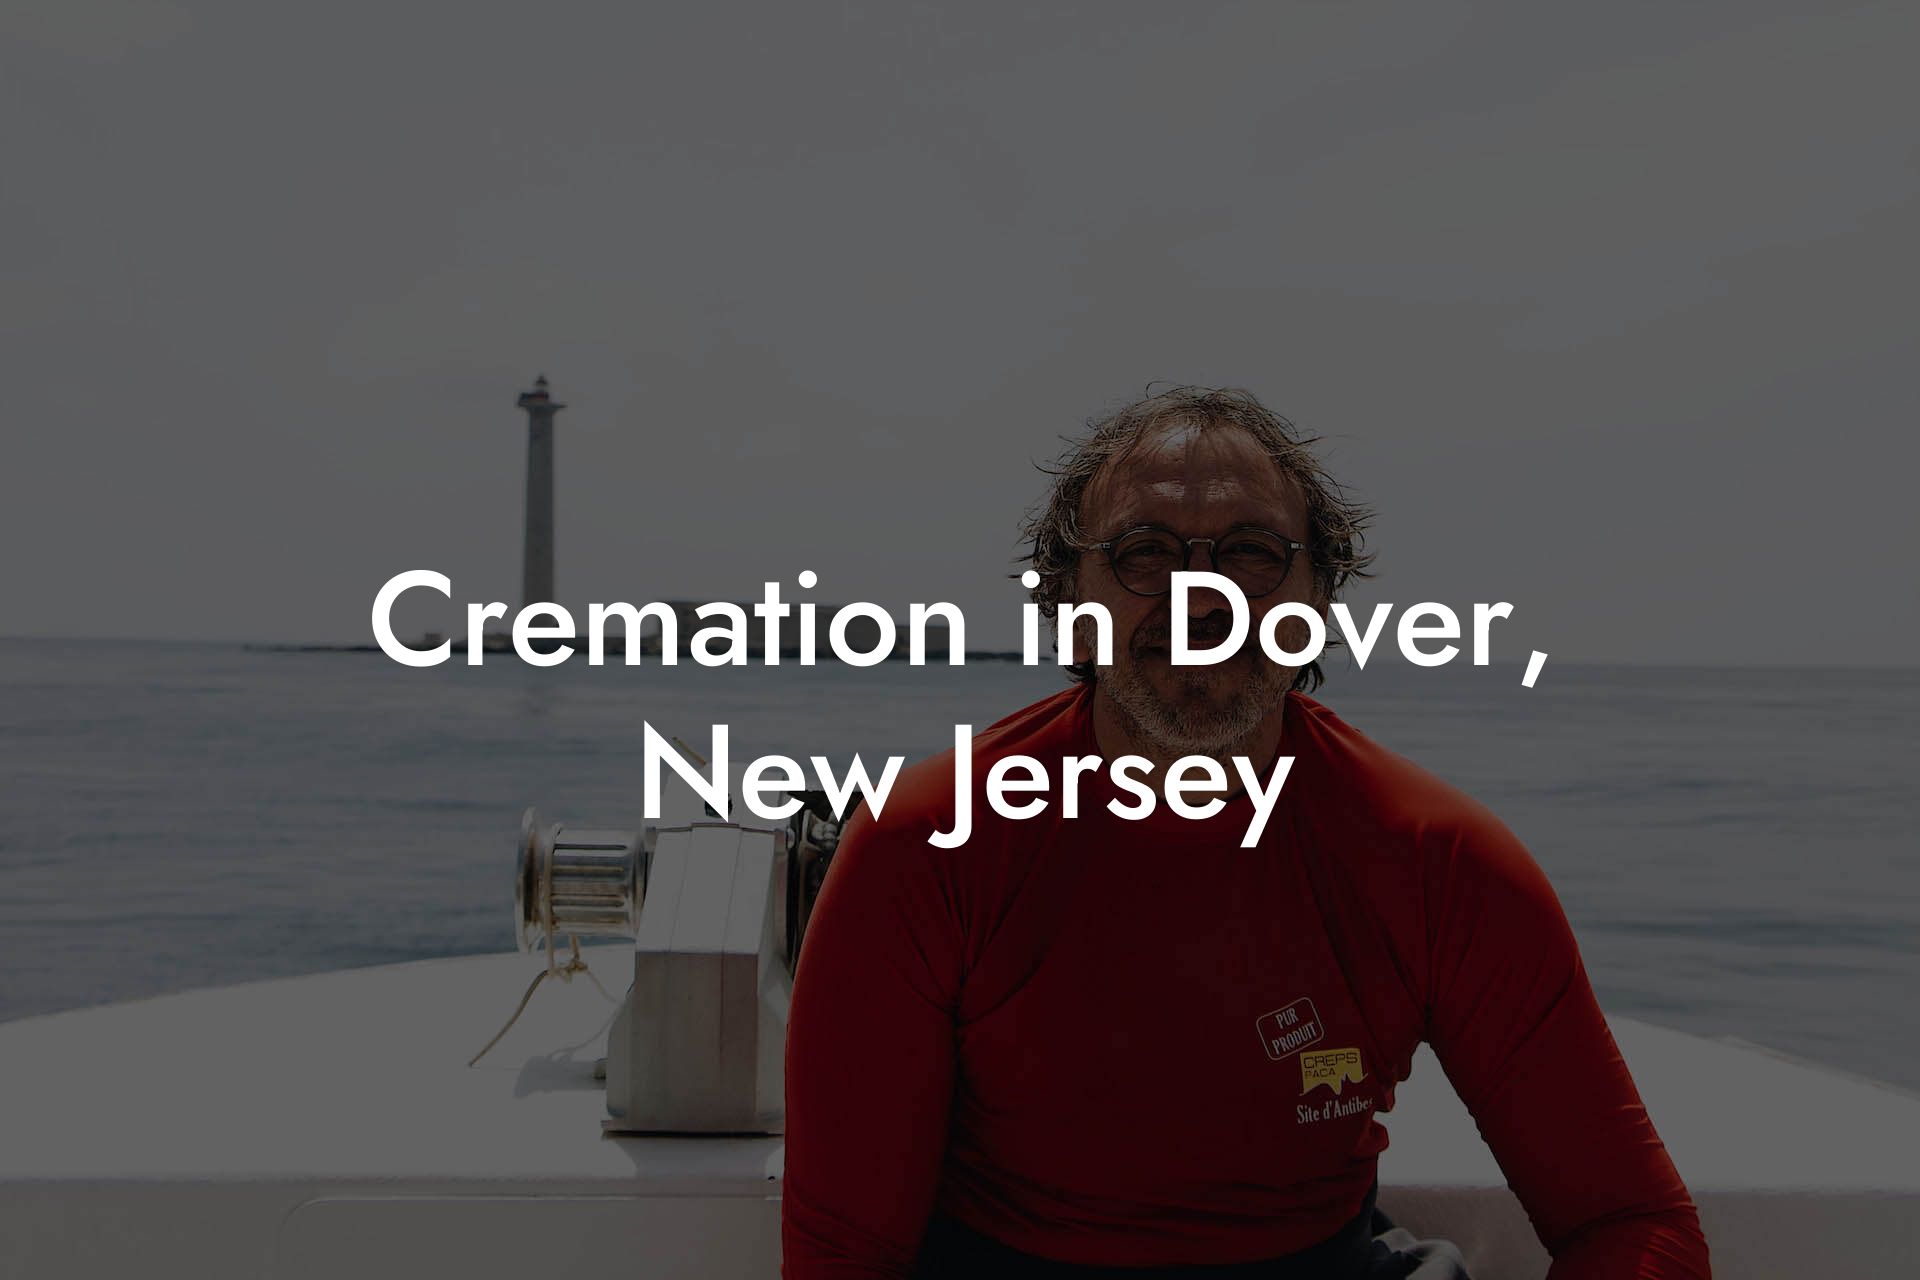 Cremation in Dover, New Jersey